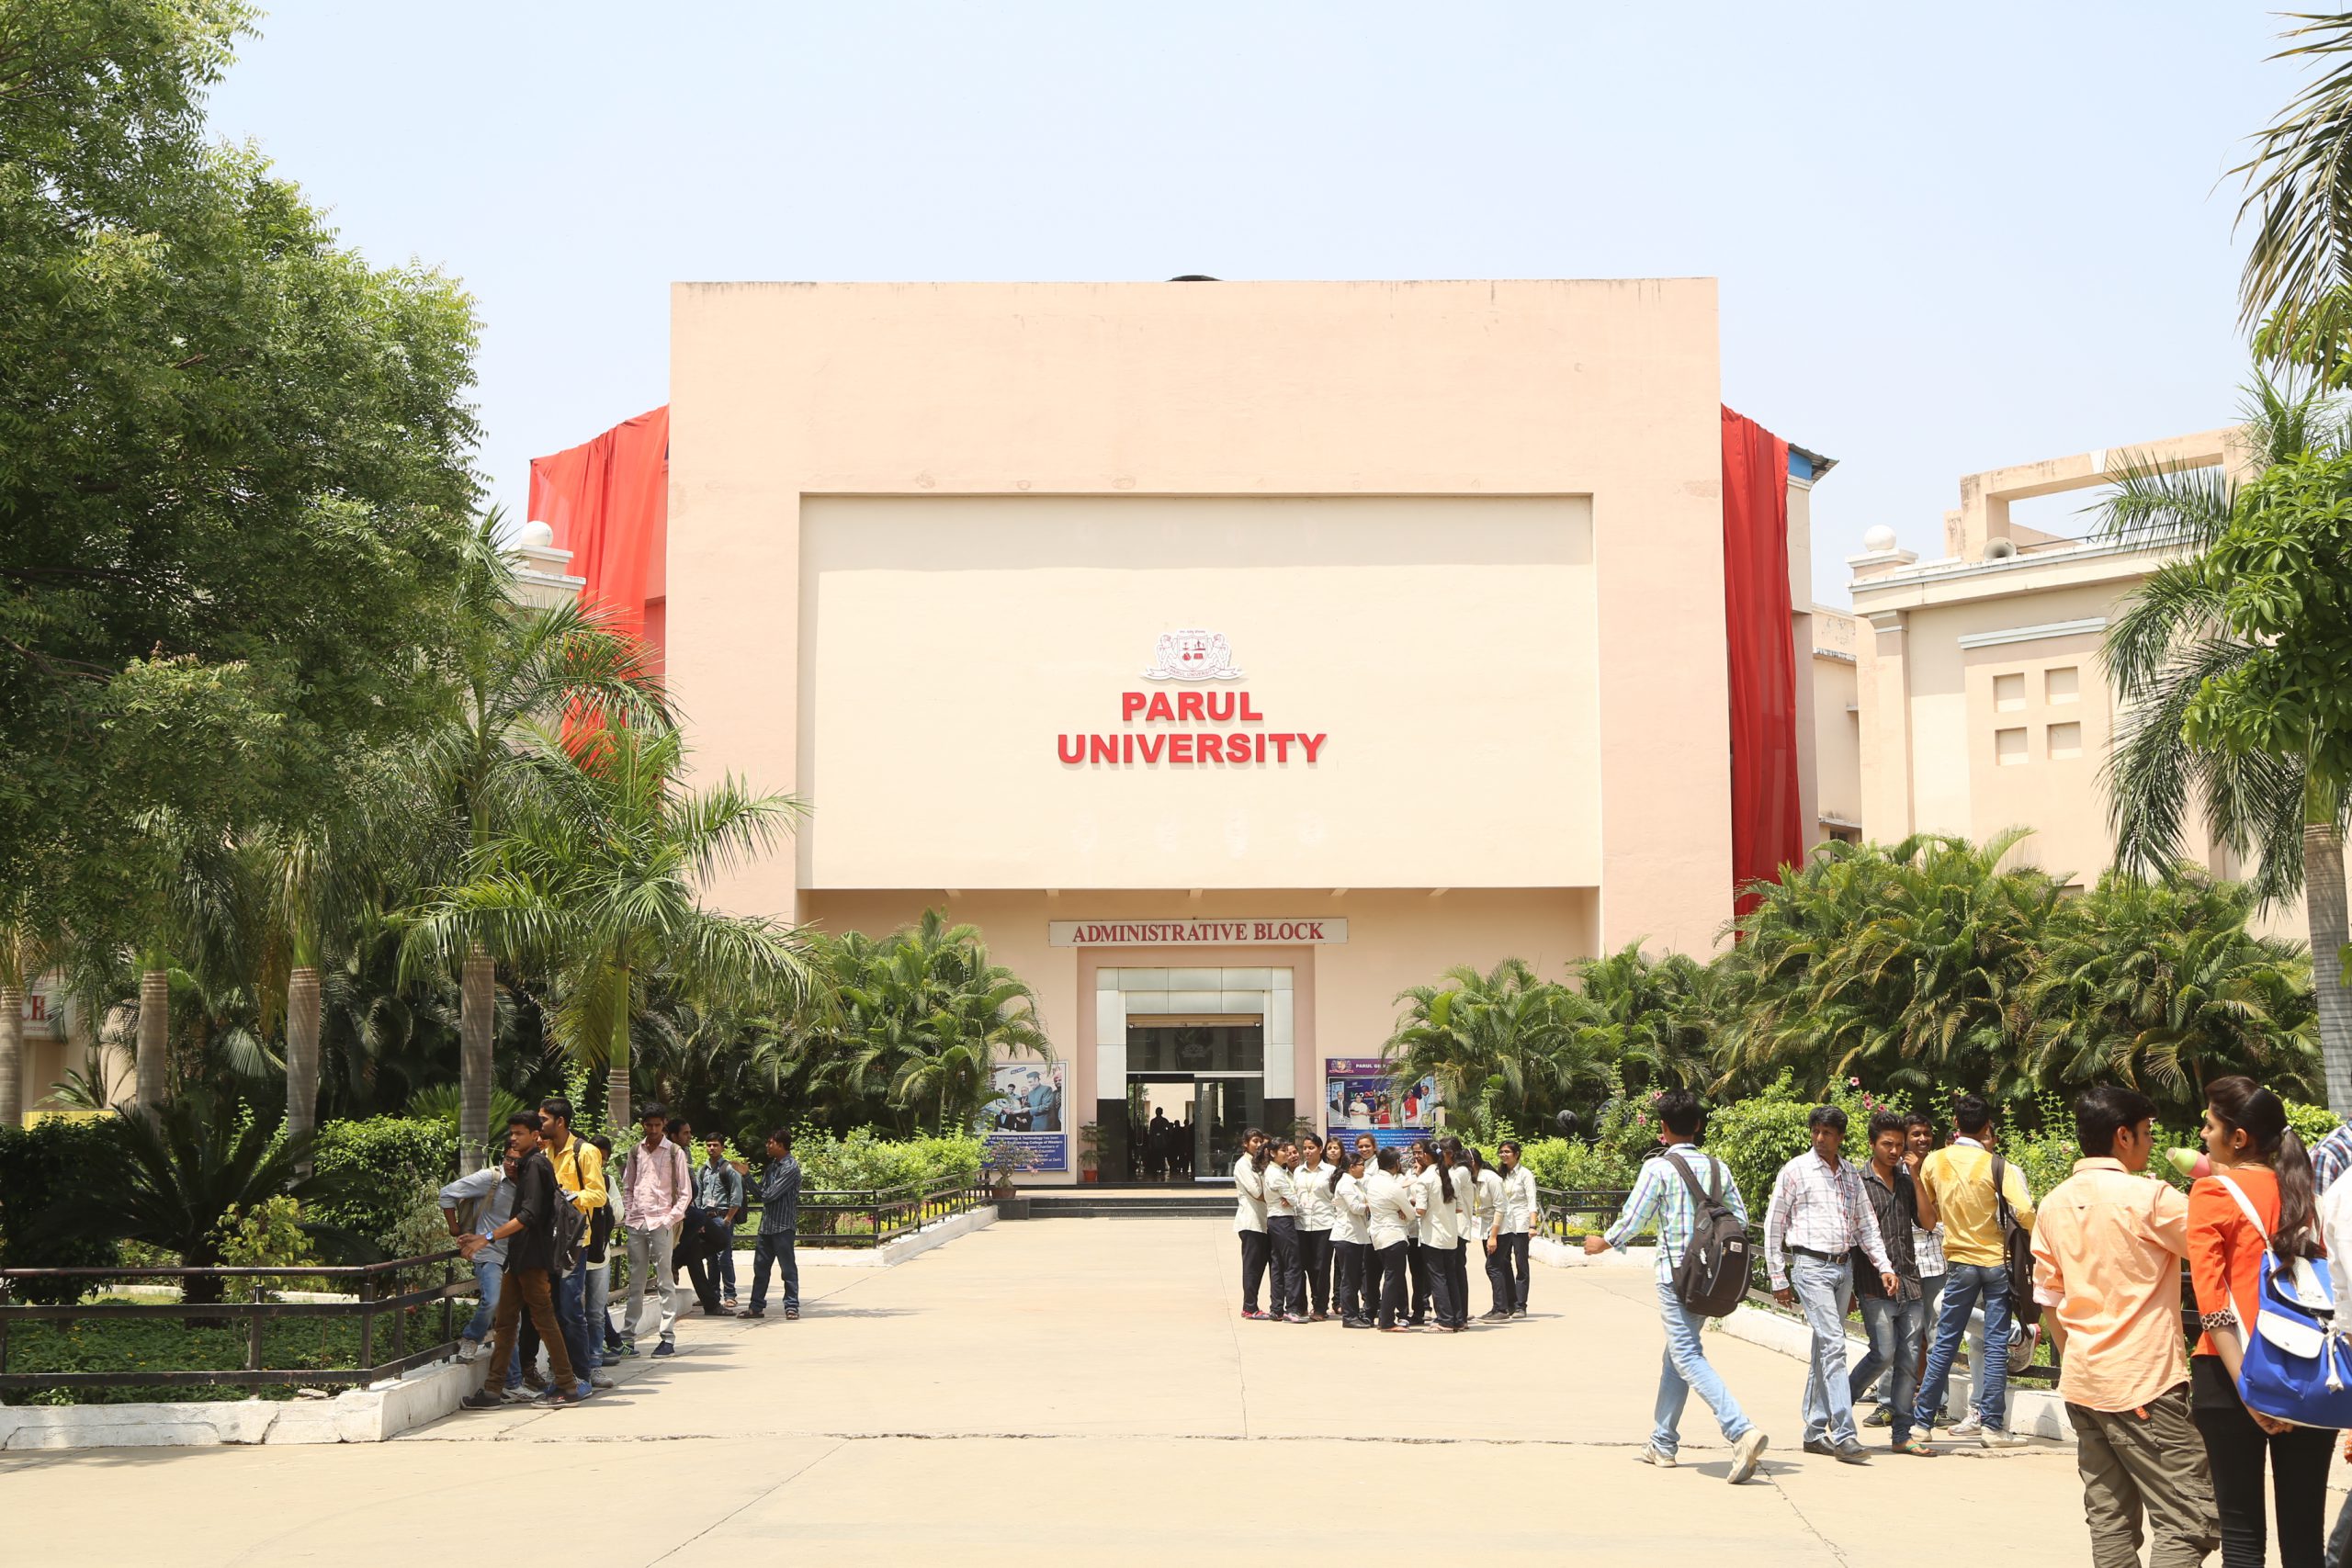 Parul University’s Healthcare community acts as a support system in the fight against Covid-19 virus